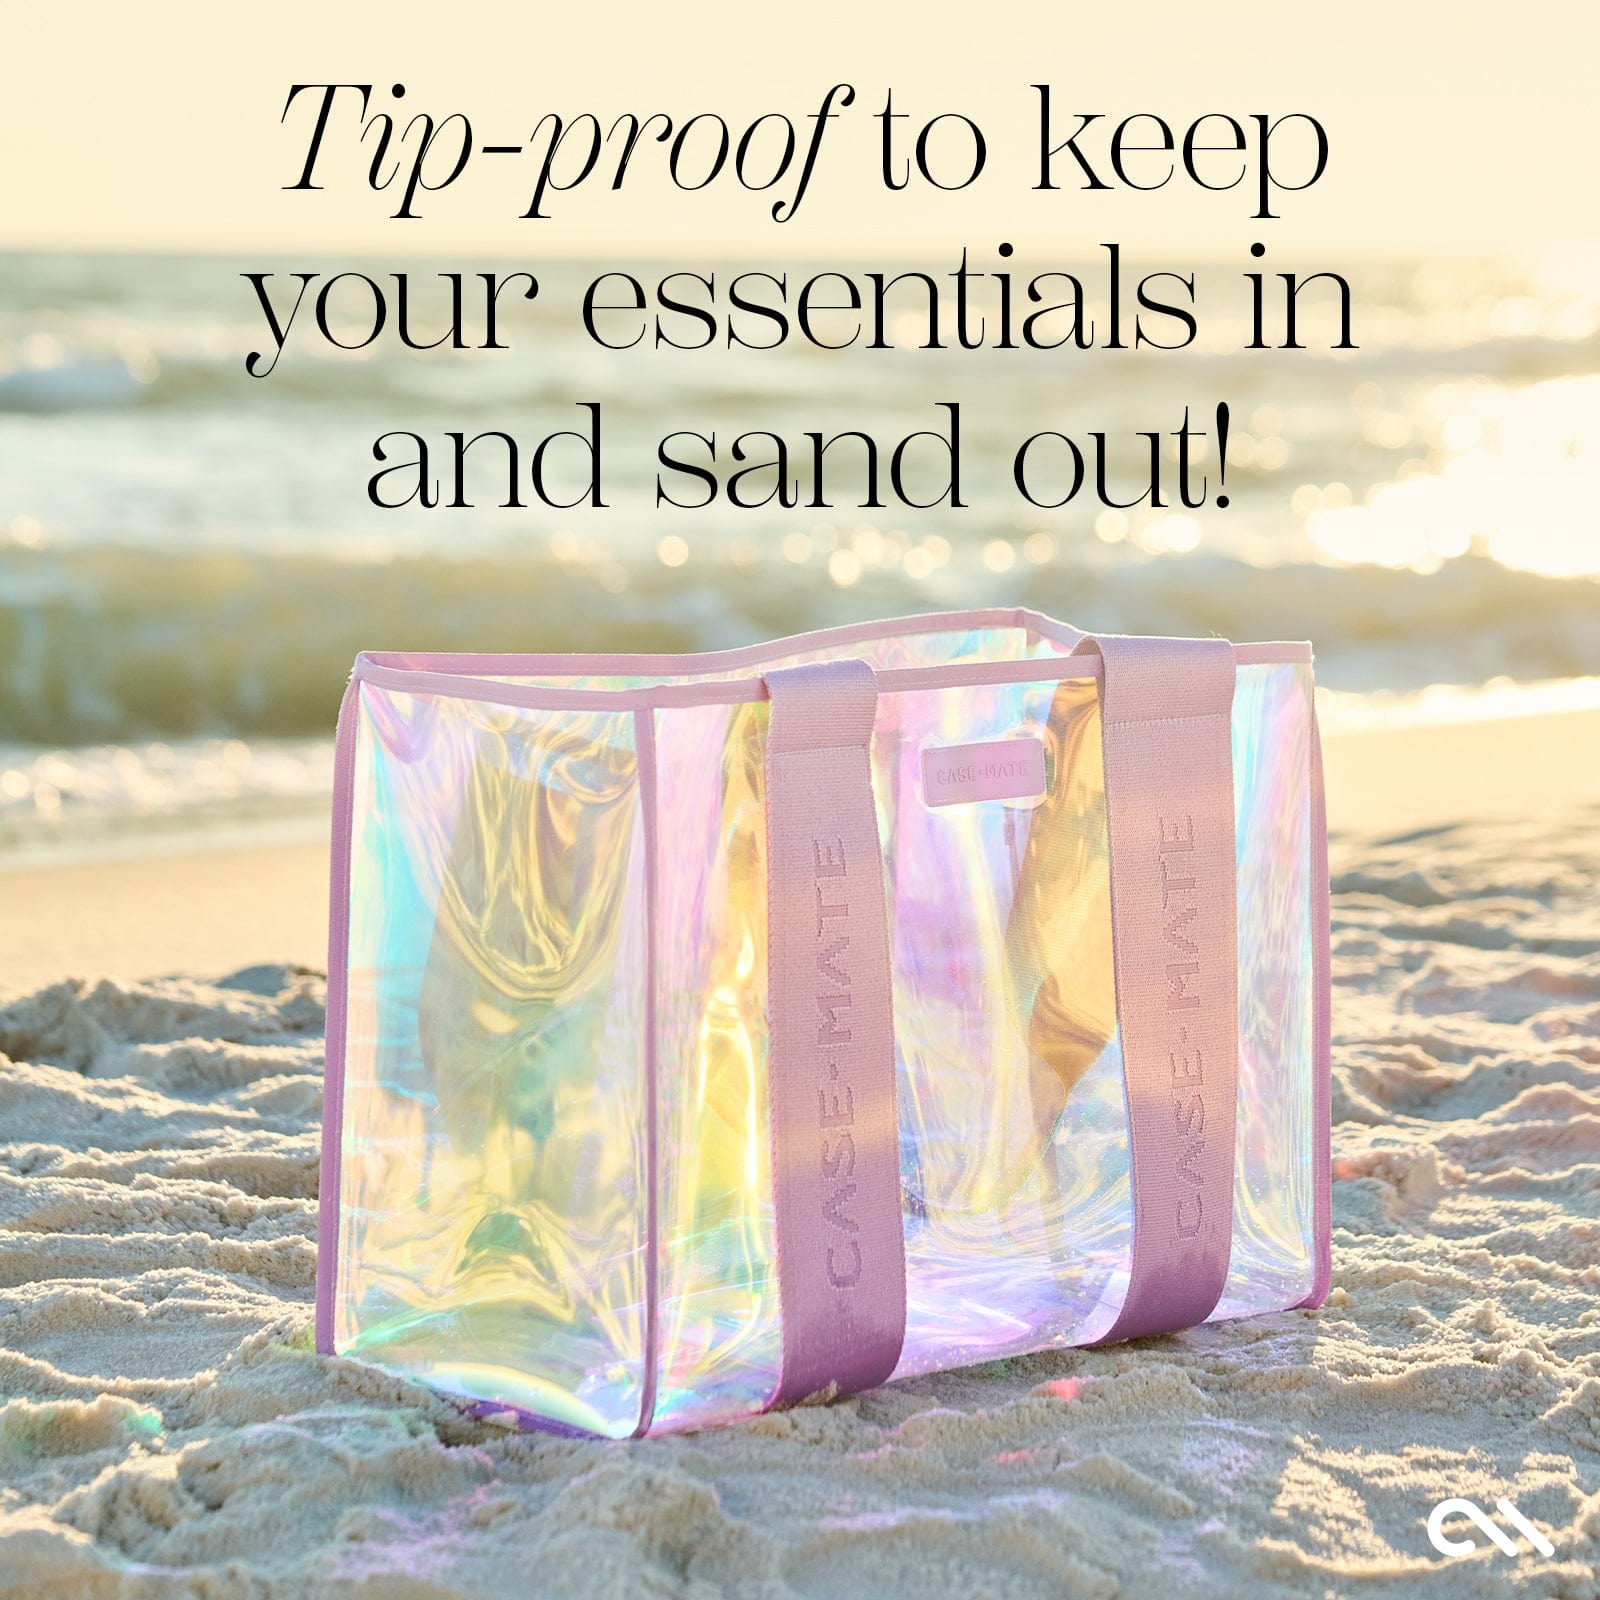 TIP-PROOF TO KEEP YOUR ESSENTIALS IN AND SAND OUT!